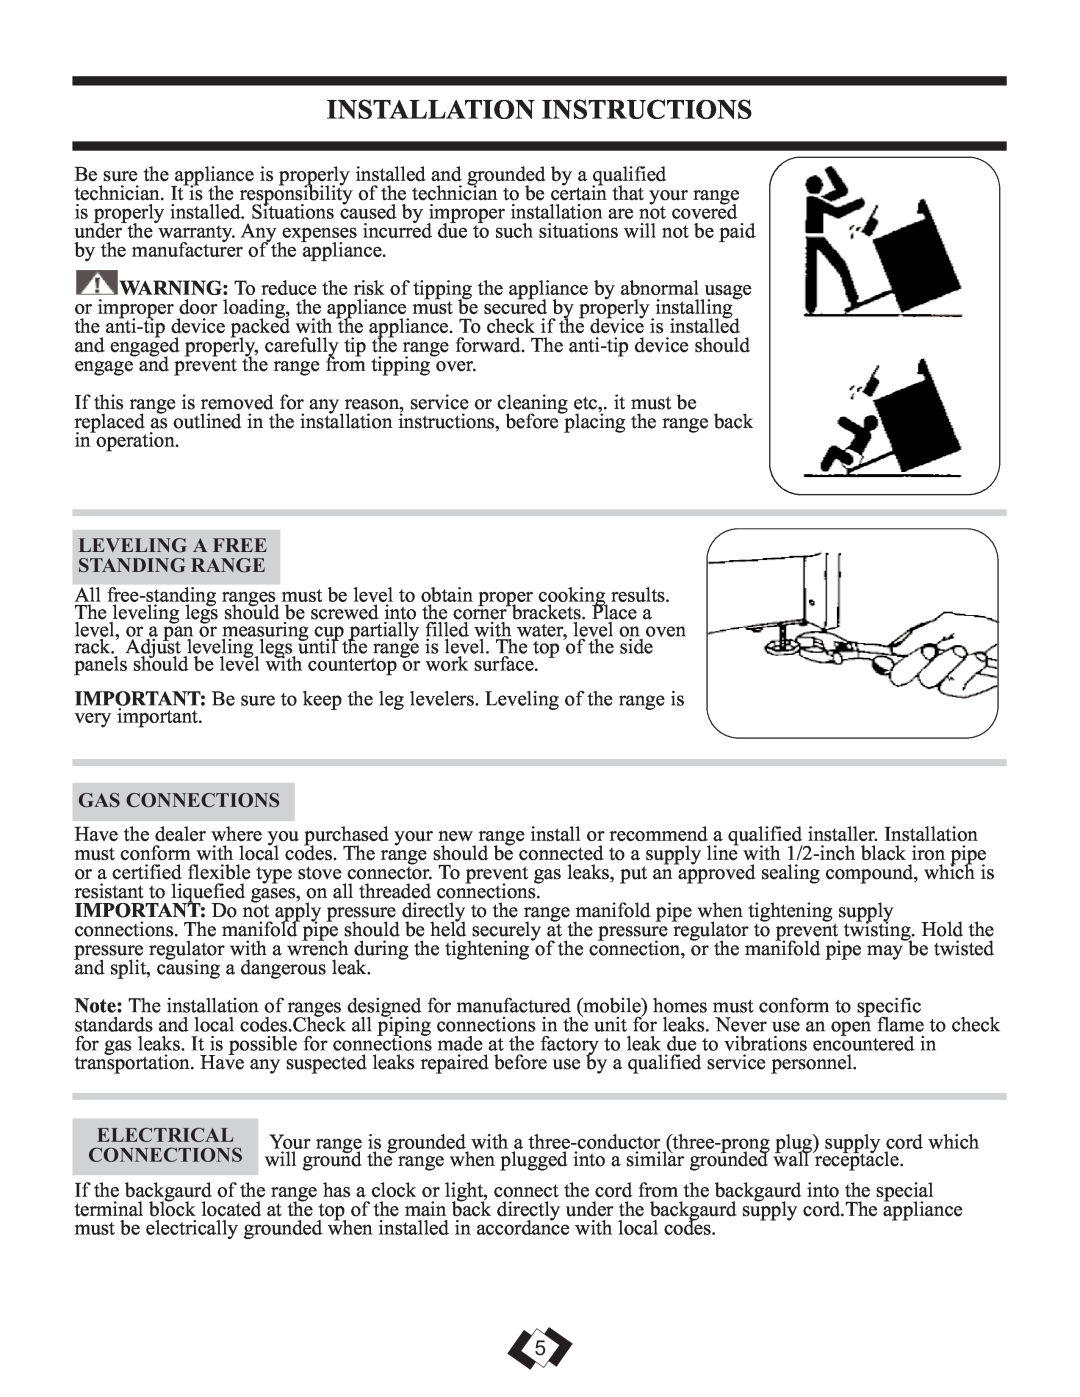 Danby DR399BLSGLP Installation Instructions, Leveling A Free Standing Range, Gas Connections, Electrical 